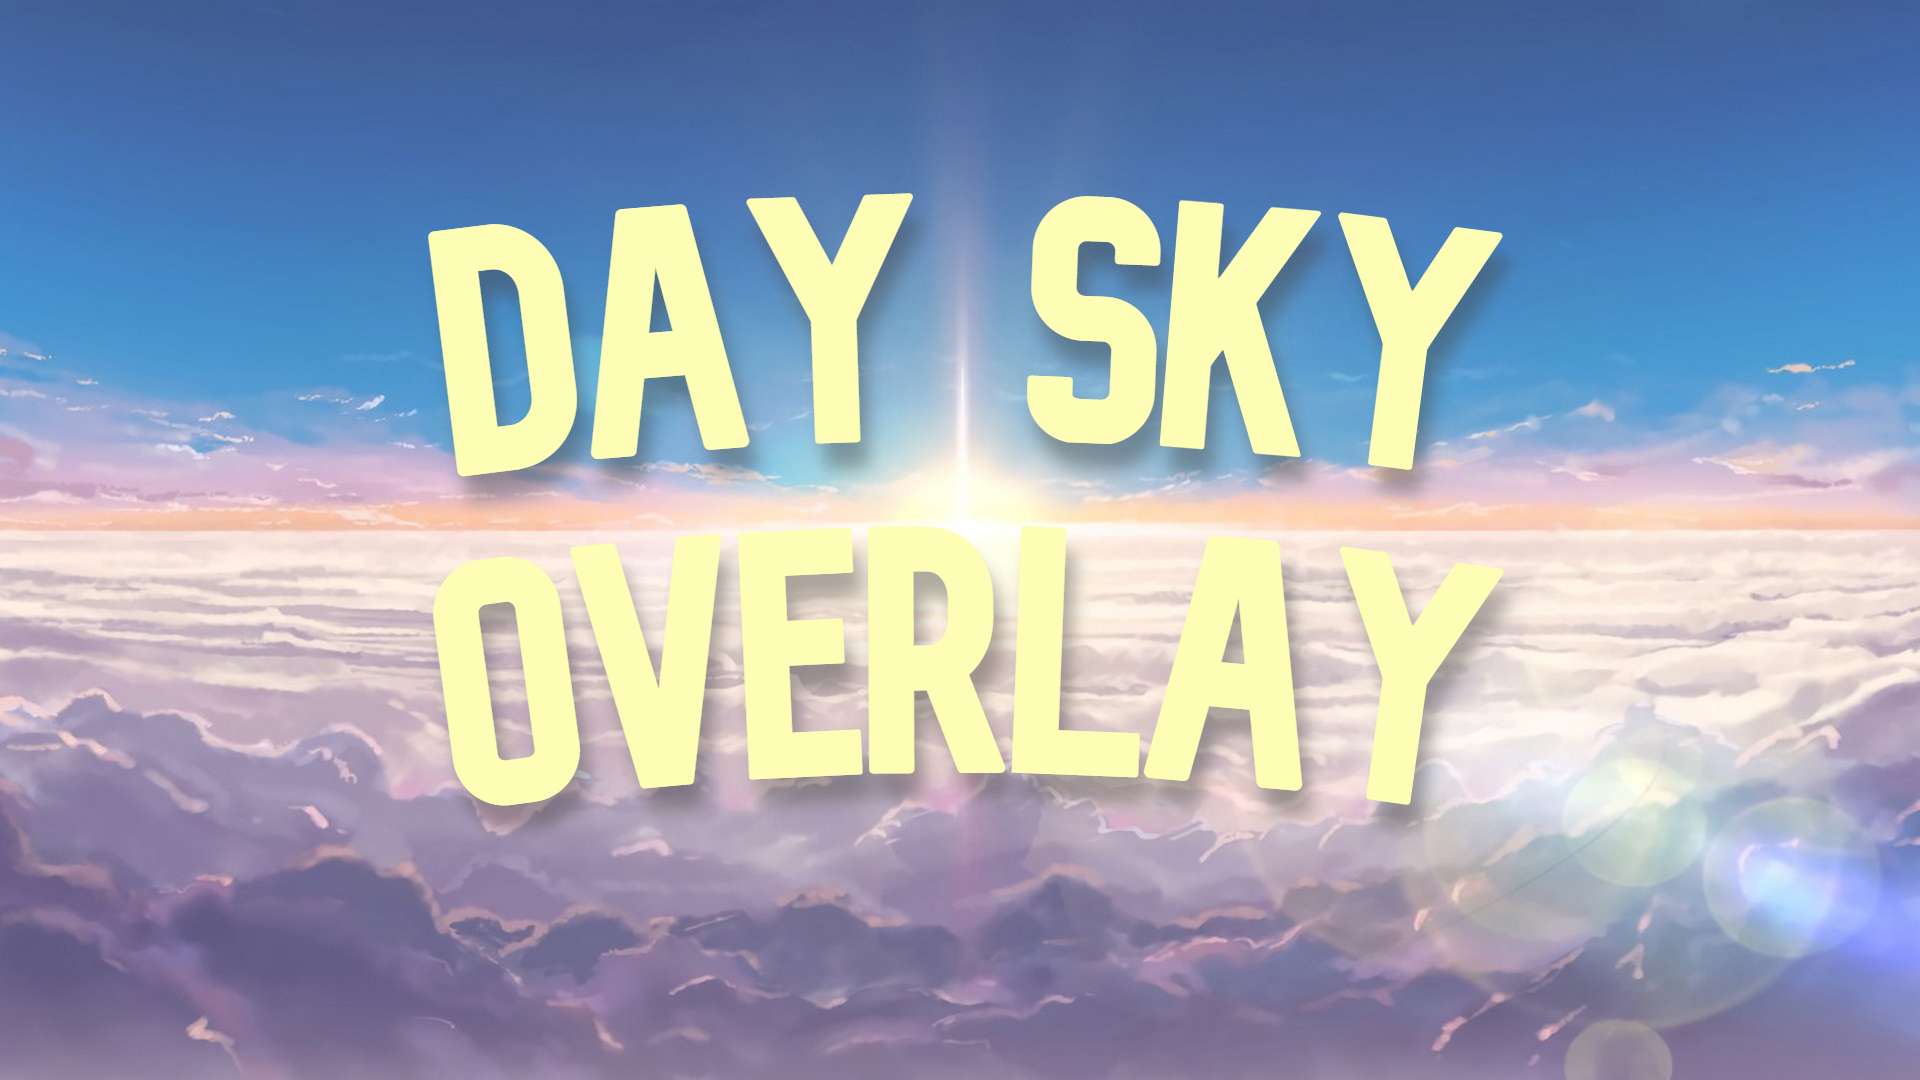 Day Sky Overlay #3 16x by rh56 on PvPRP